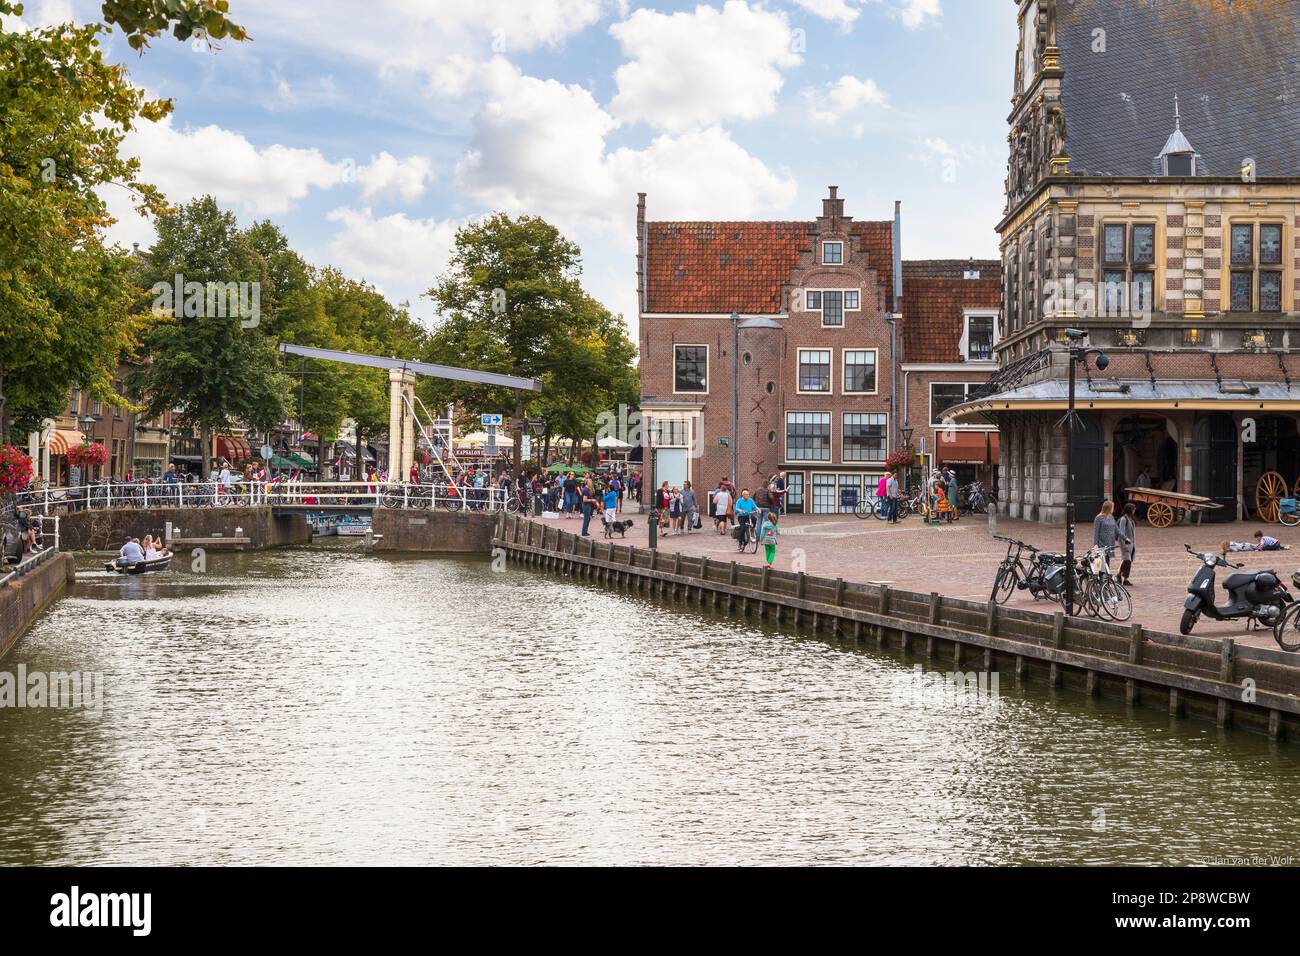 Cityscape of the center of the historic town of Alkmaar in the Netherlands. Stock Photo